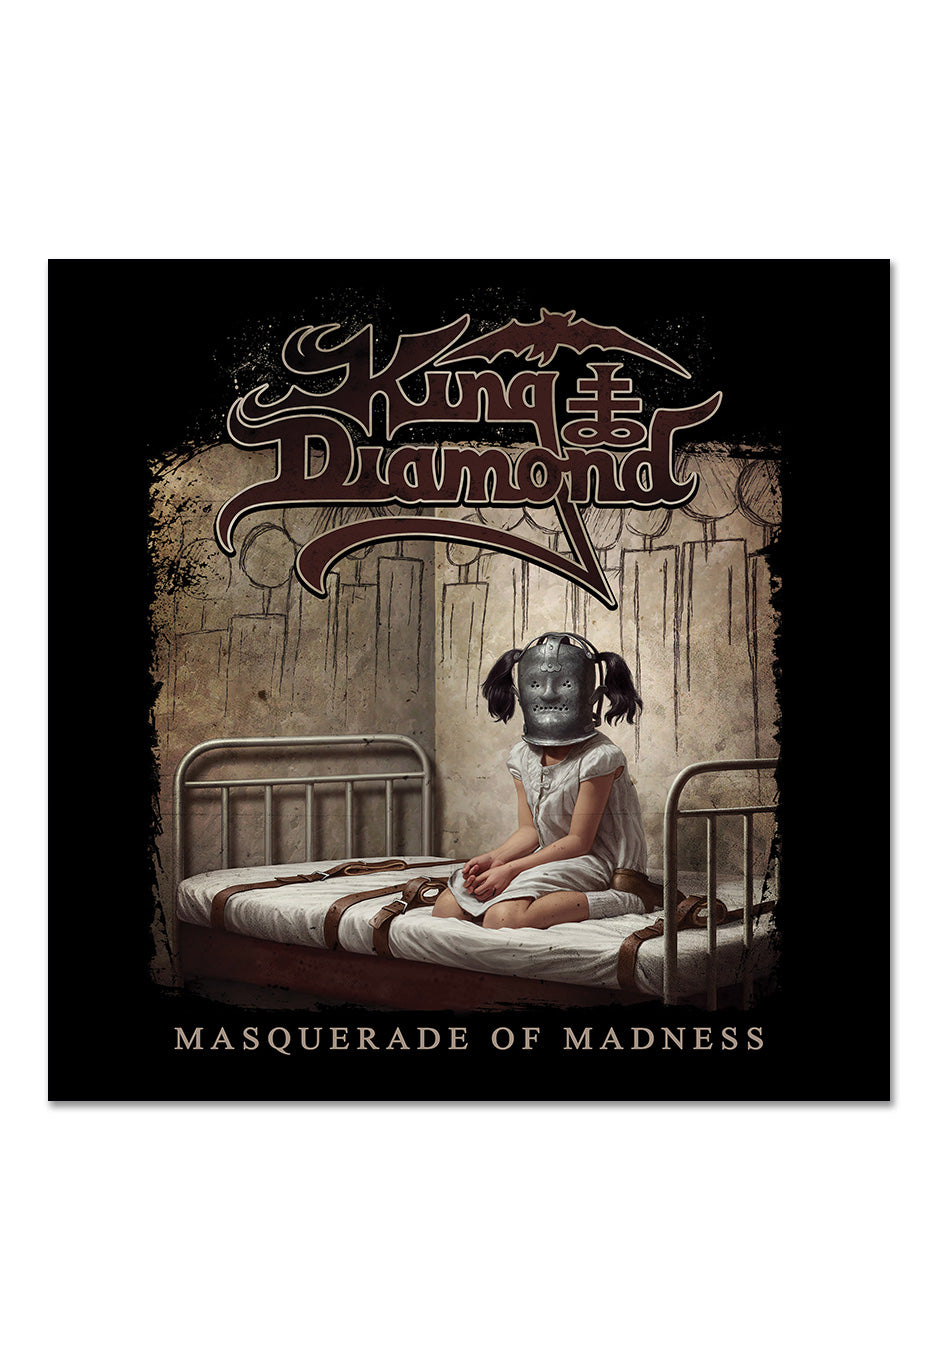 King Diamond - Masquerade Of Madness EP Clear Violet/Brown - Marbled Vinyl